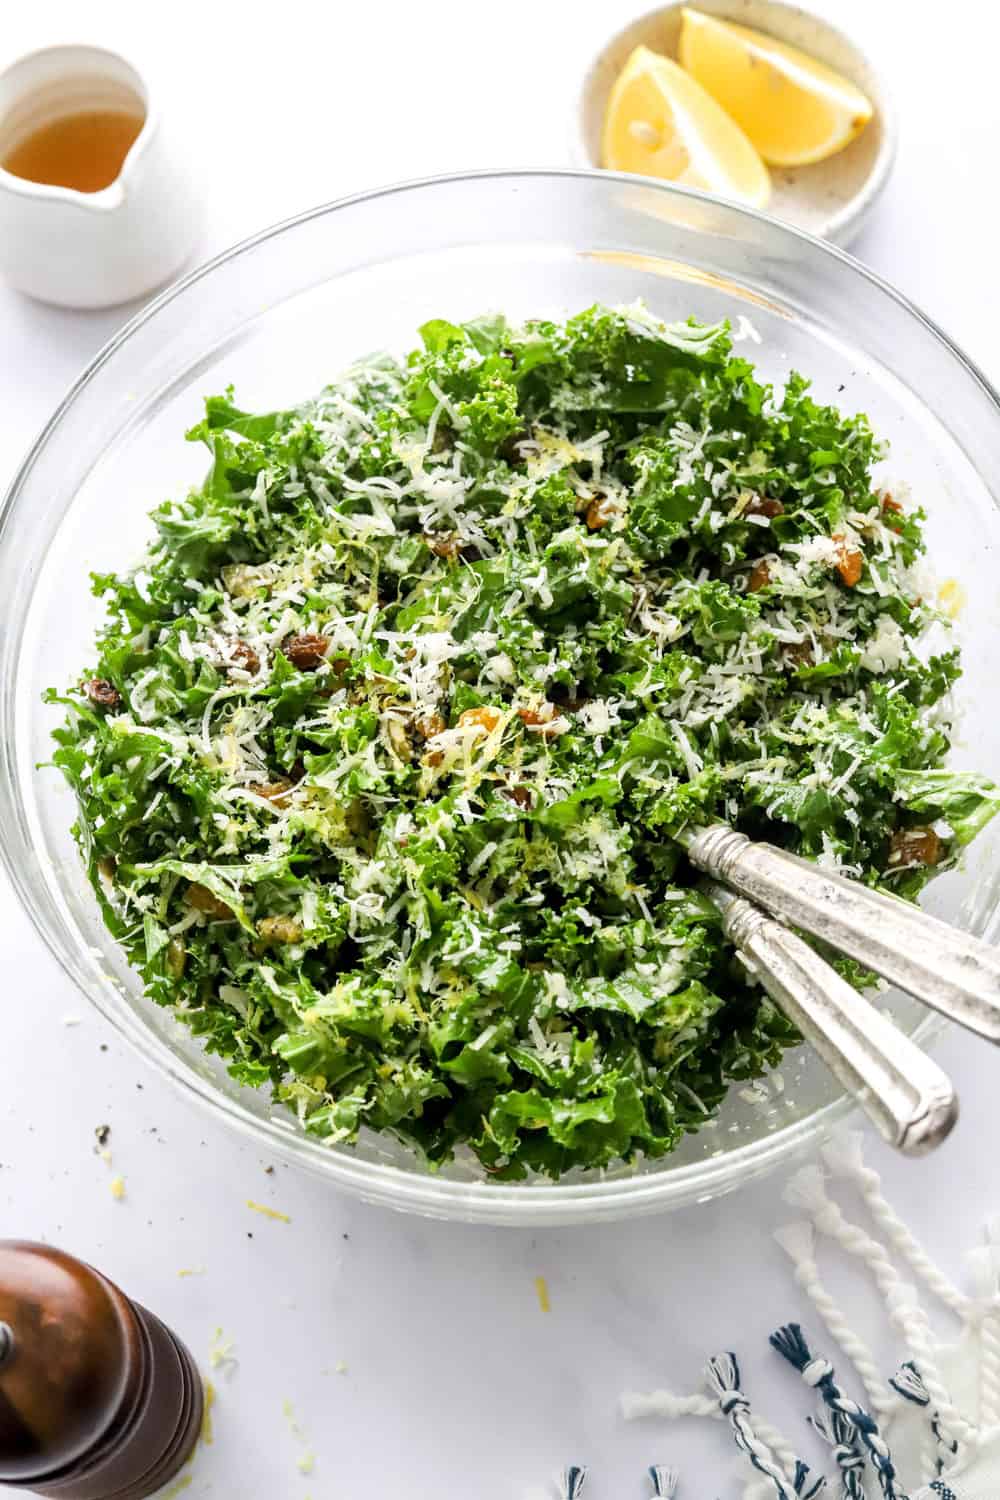 Chopped kale in a glass bowl mixed up with nuts, raisins, shredded cheese and lemon zest with silver serving spoons in the bowl and salad dressing in a white jar with lemon slices in a bowl behind it